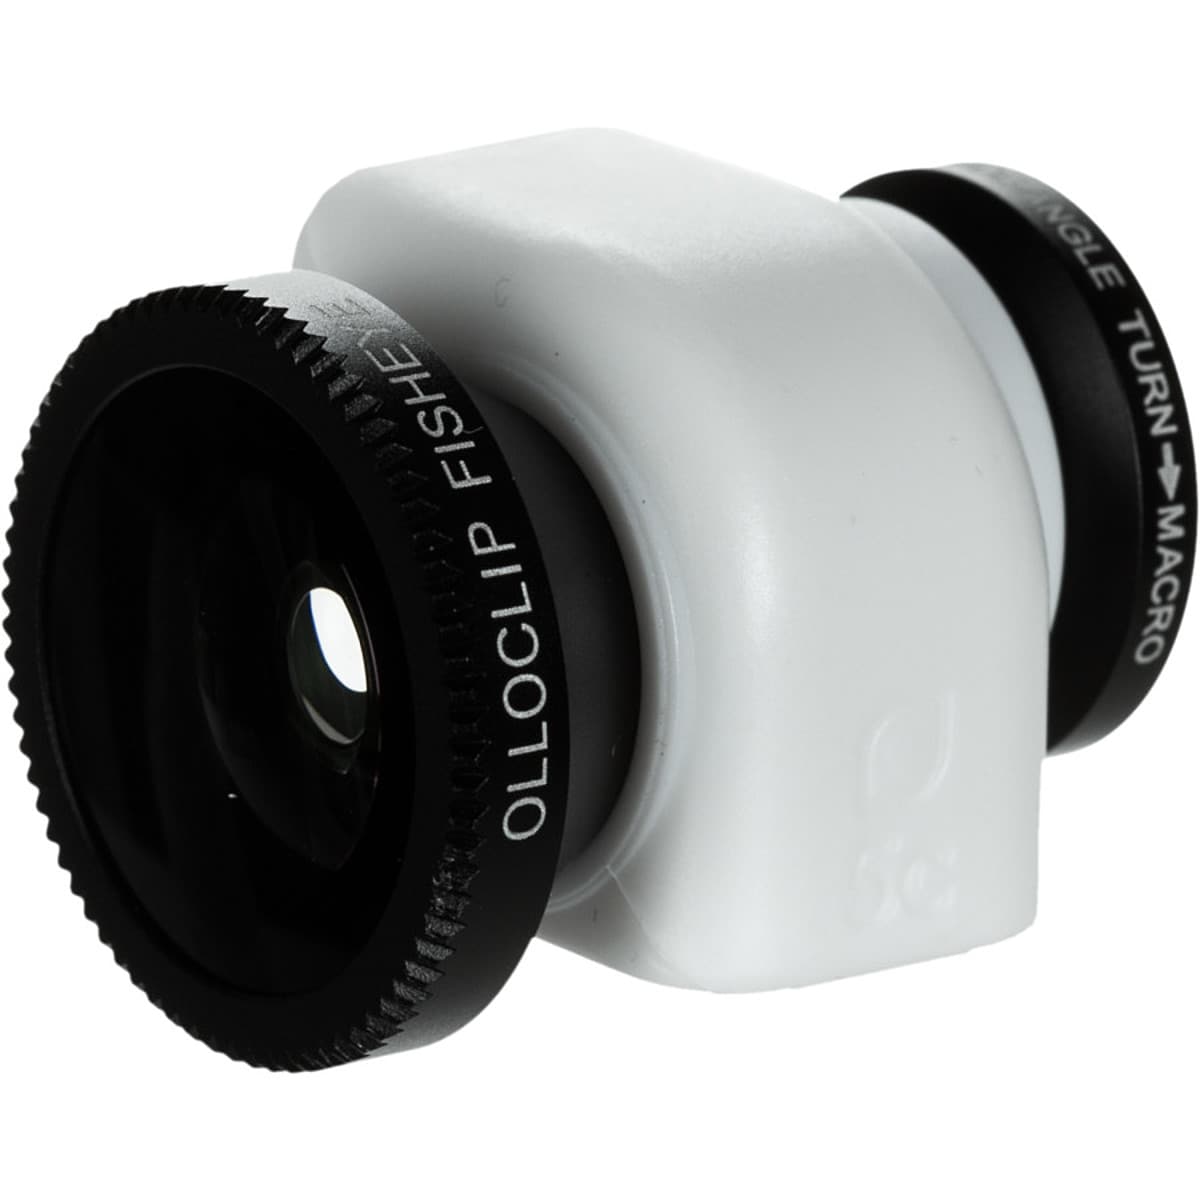 olloclip 3-in-1 Lens - iPhone 5c Black Lens\/White Clip, One Size